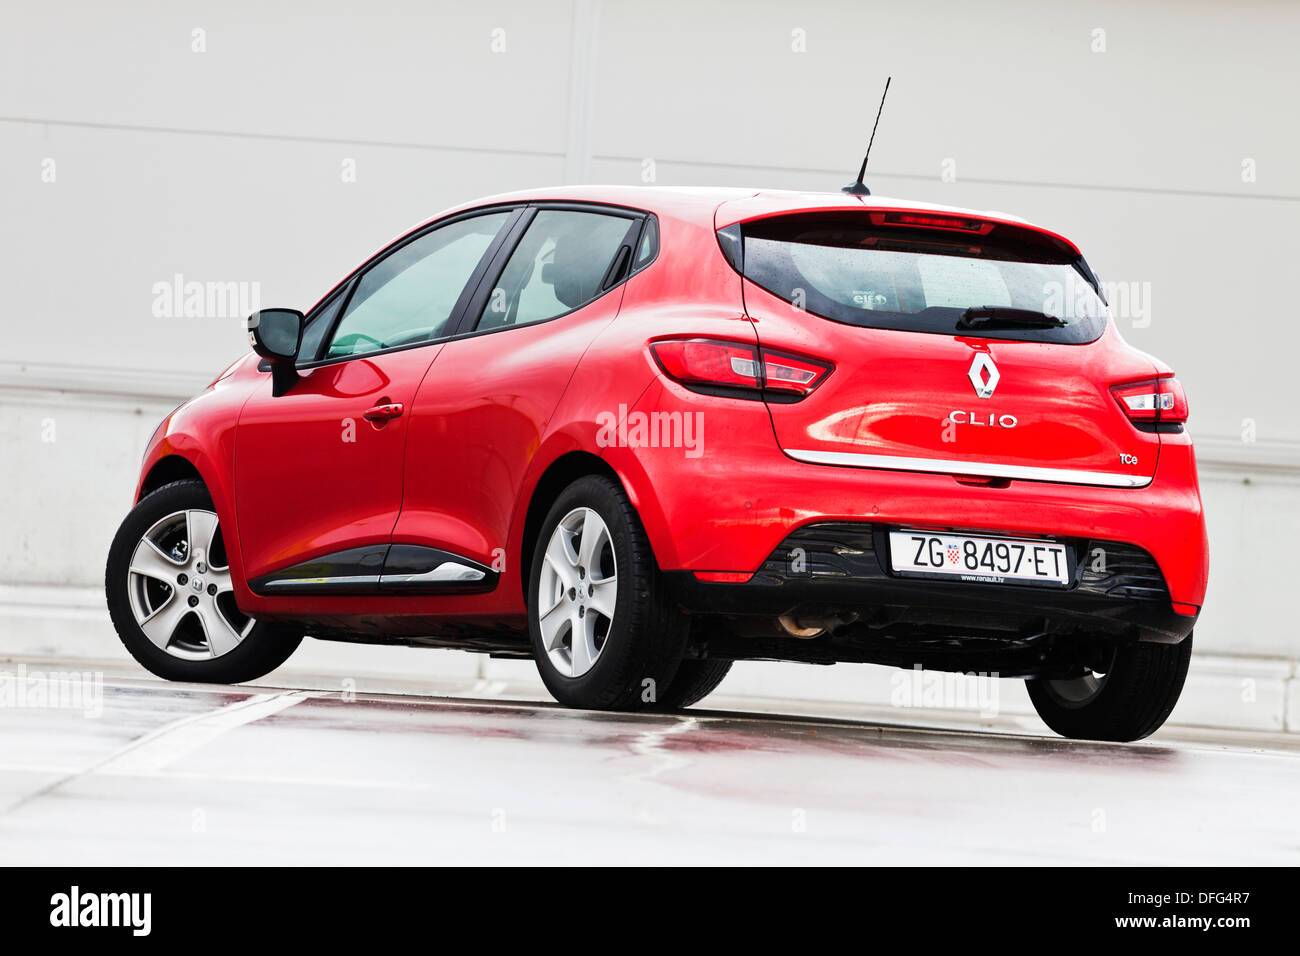 Clio iv stock photography and images - Alamy